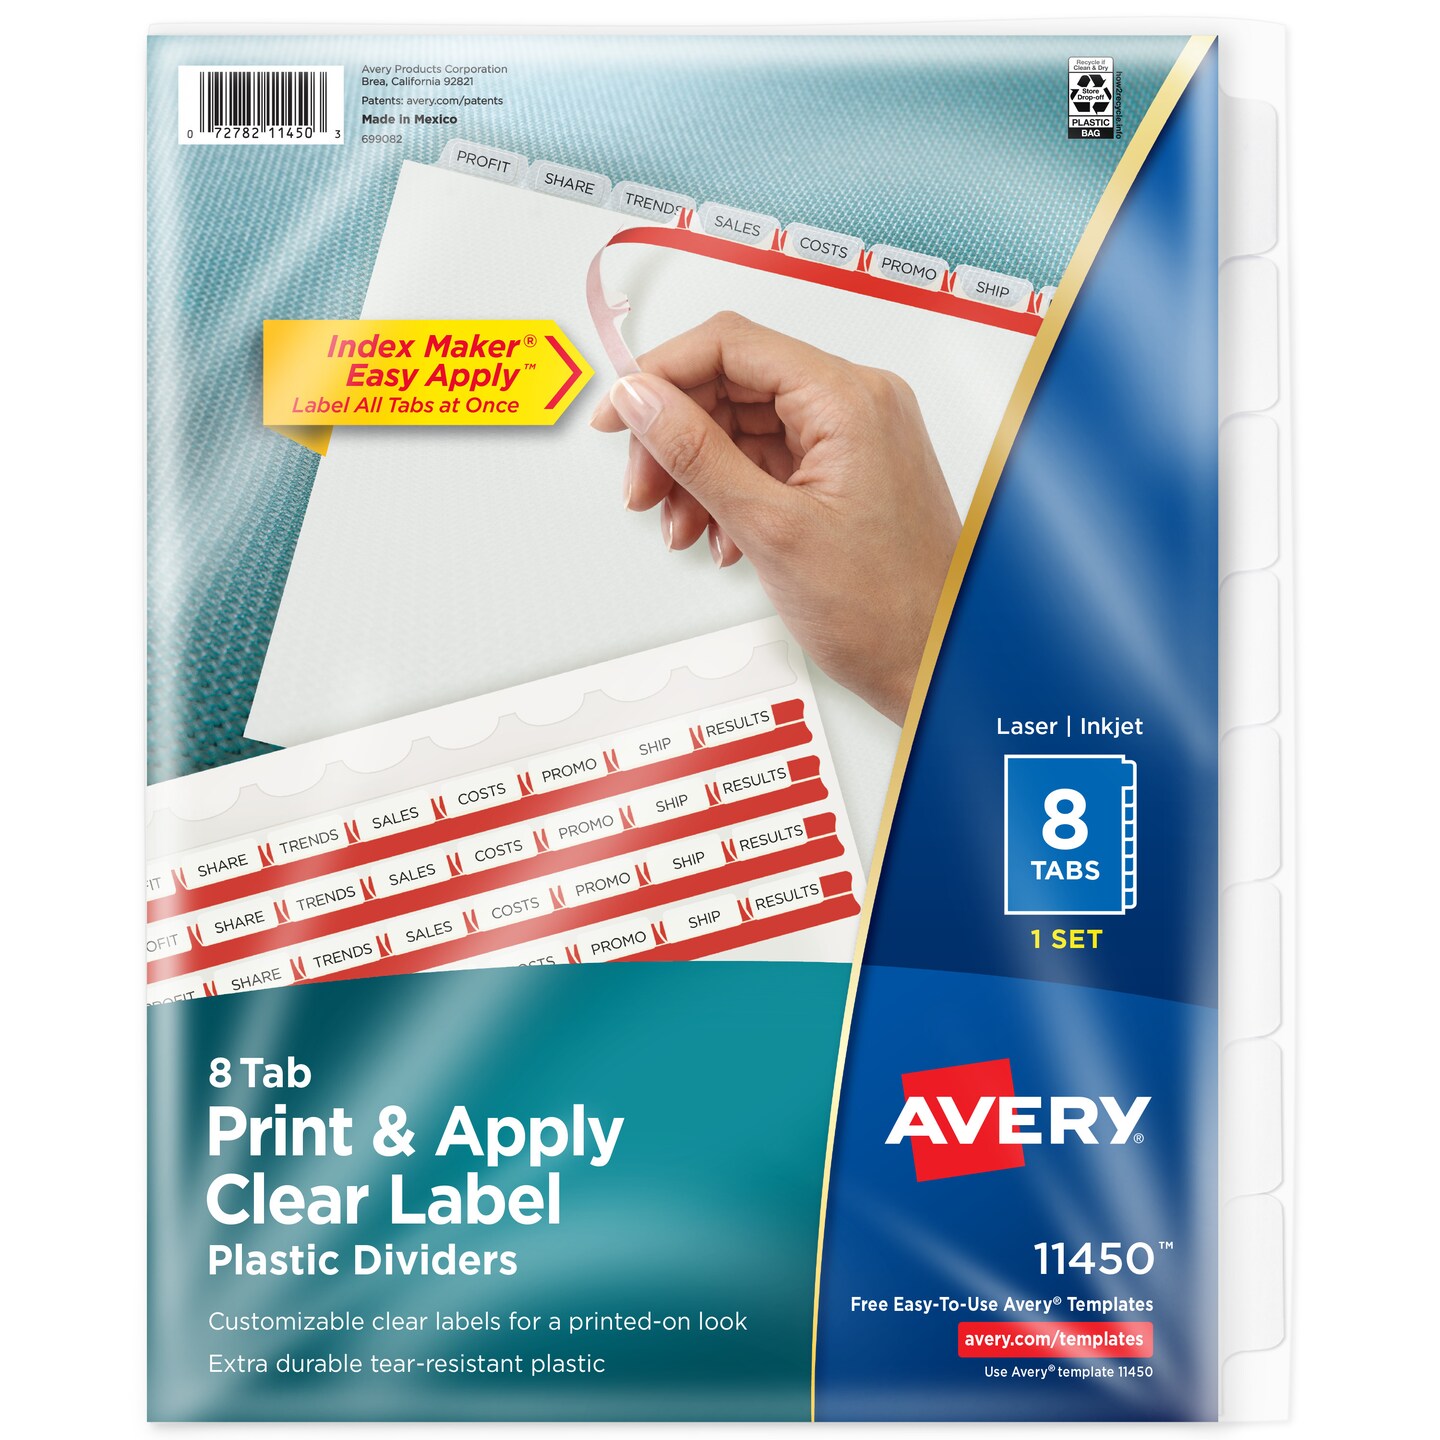 Avery 8 Tab Plastic Dividers for 3 Ring Binder, Easy Print & Apply ...